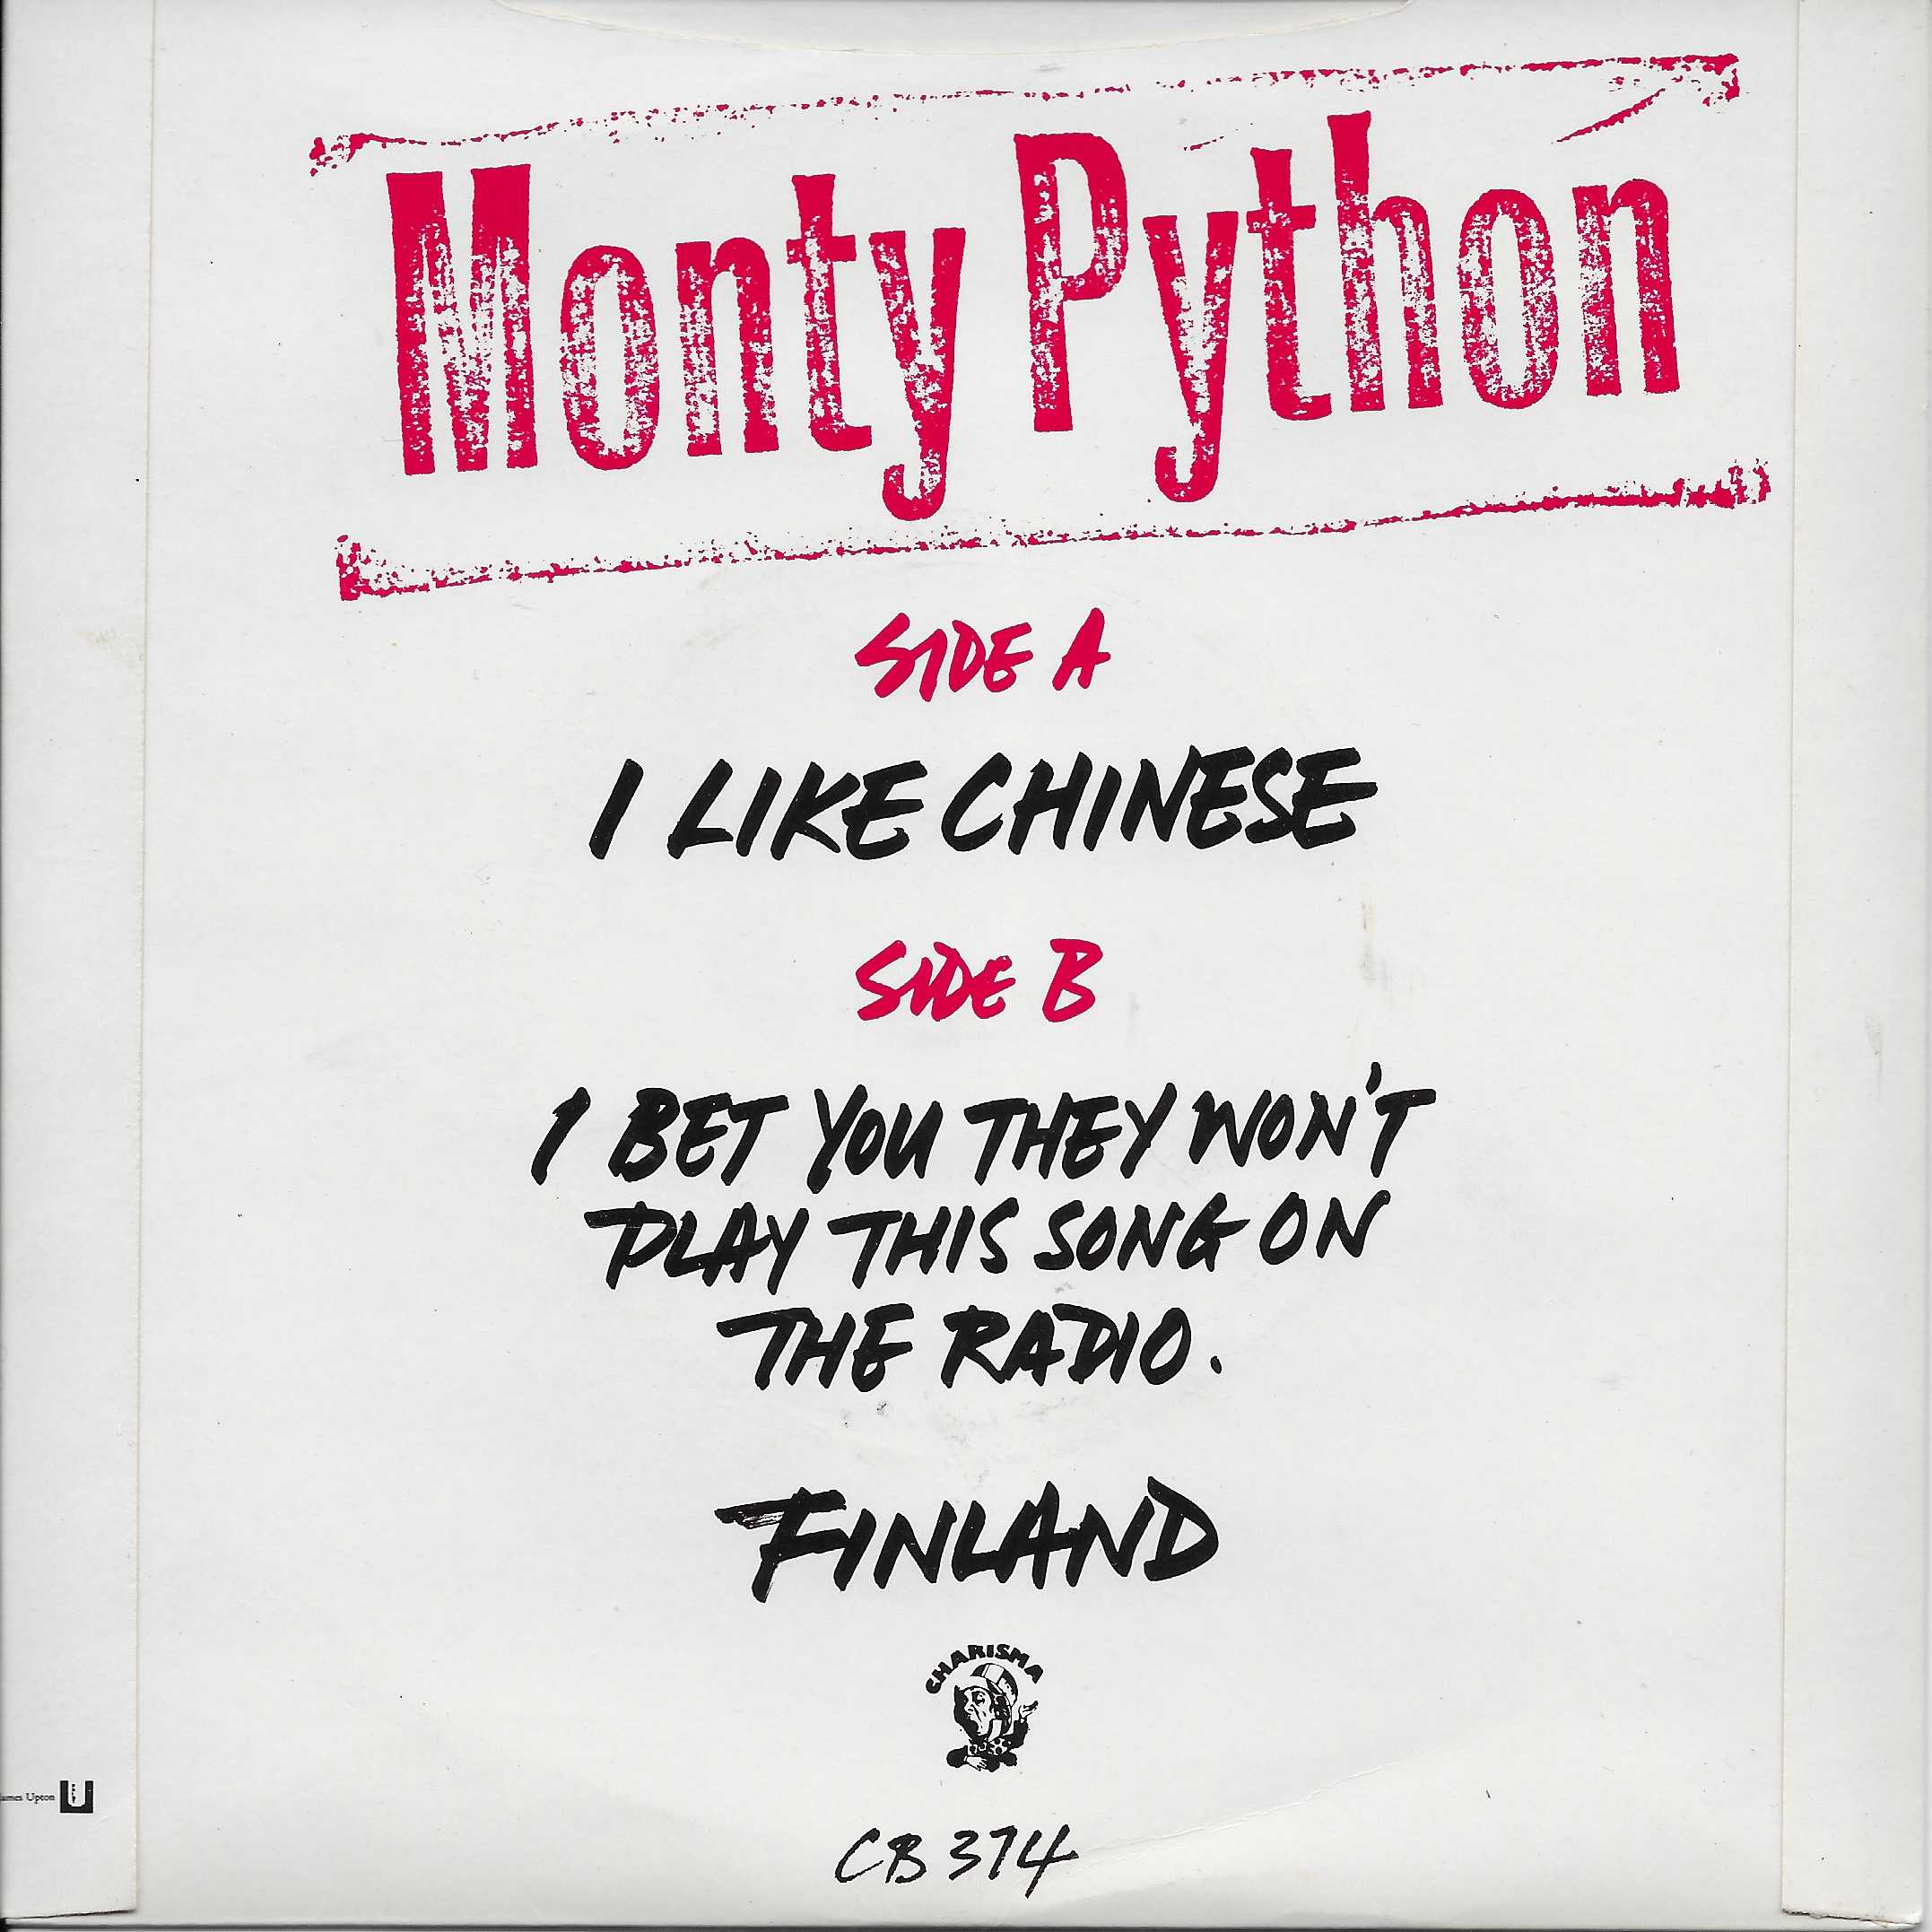 Picture of CB 374 I like Chinese (Monty Python's flying circus) by artist Monty Python from the BBC records and Tapes library